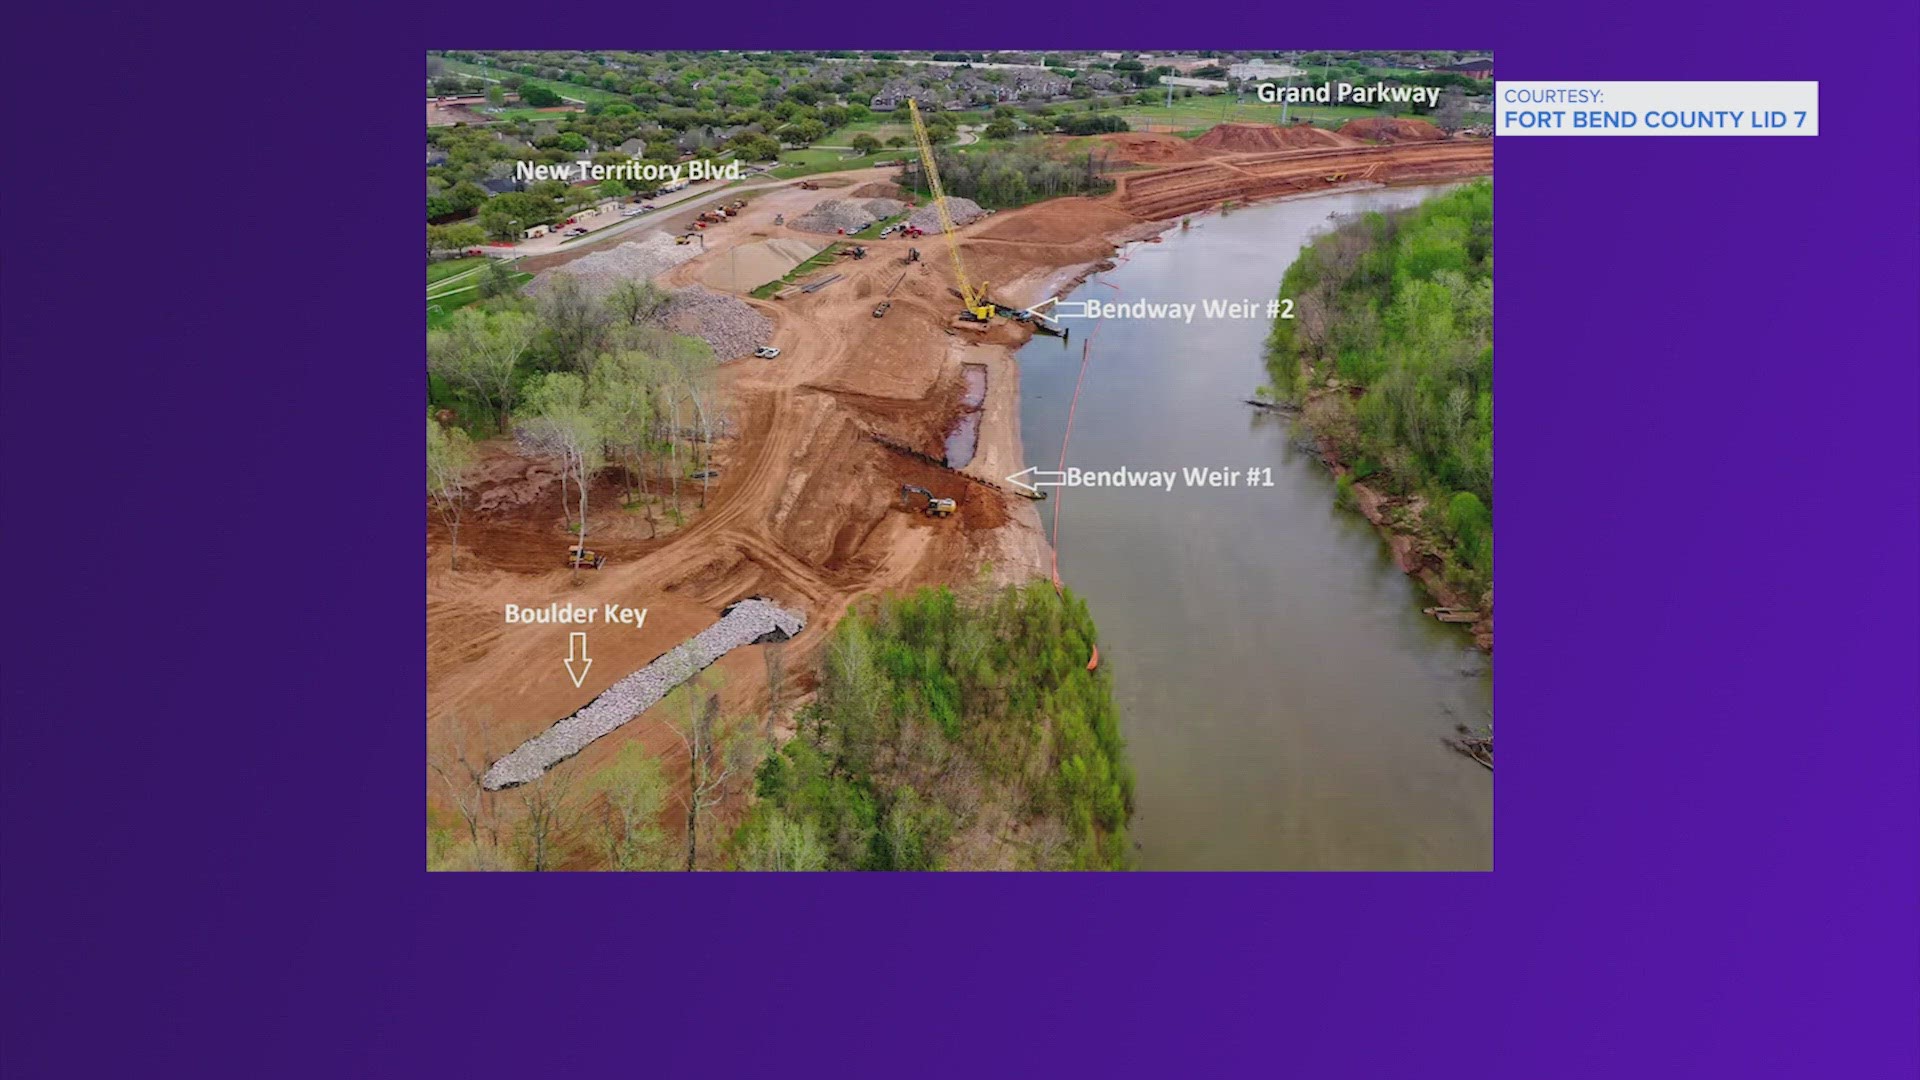 The project aims at tackling erosion found on the banks of the river, much of which happened from past flooding, including Hurricane Harvey.